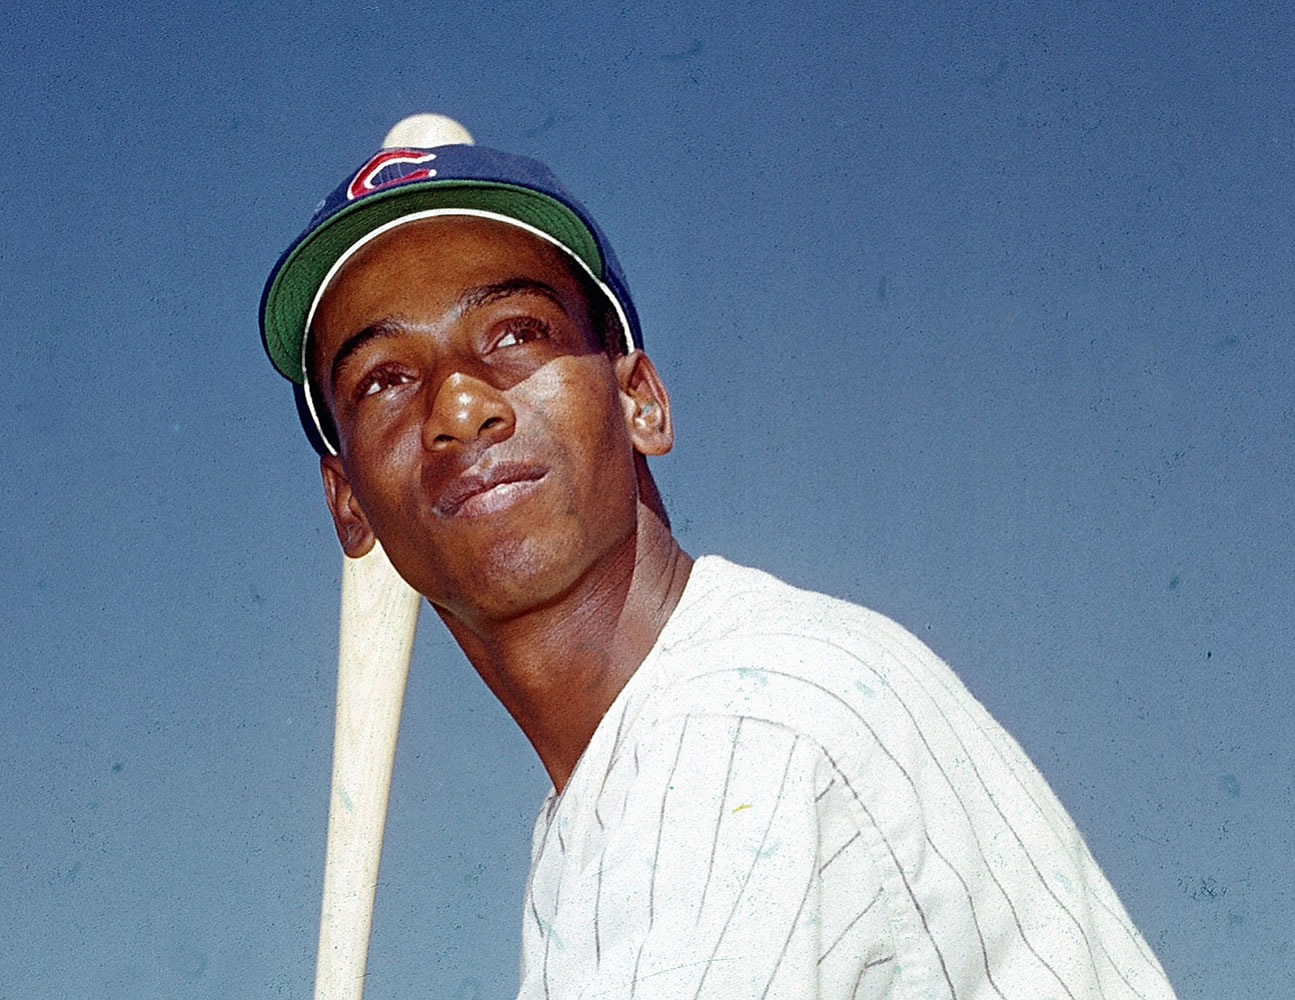 Chicago Cubs Hall of Famer Ernie Banks dies at 83 - The Columbian